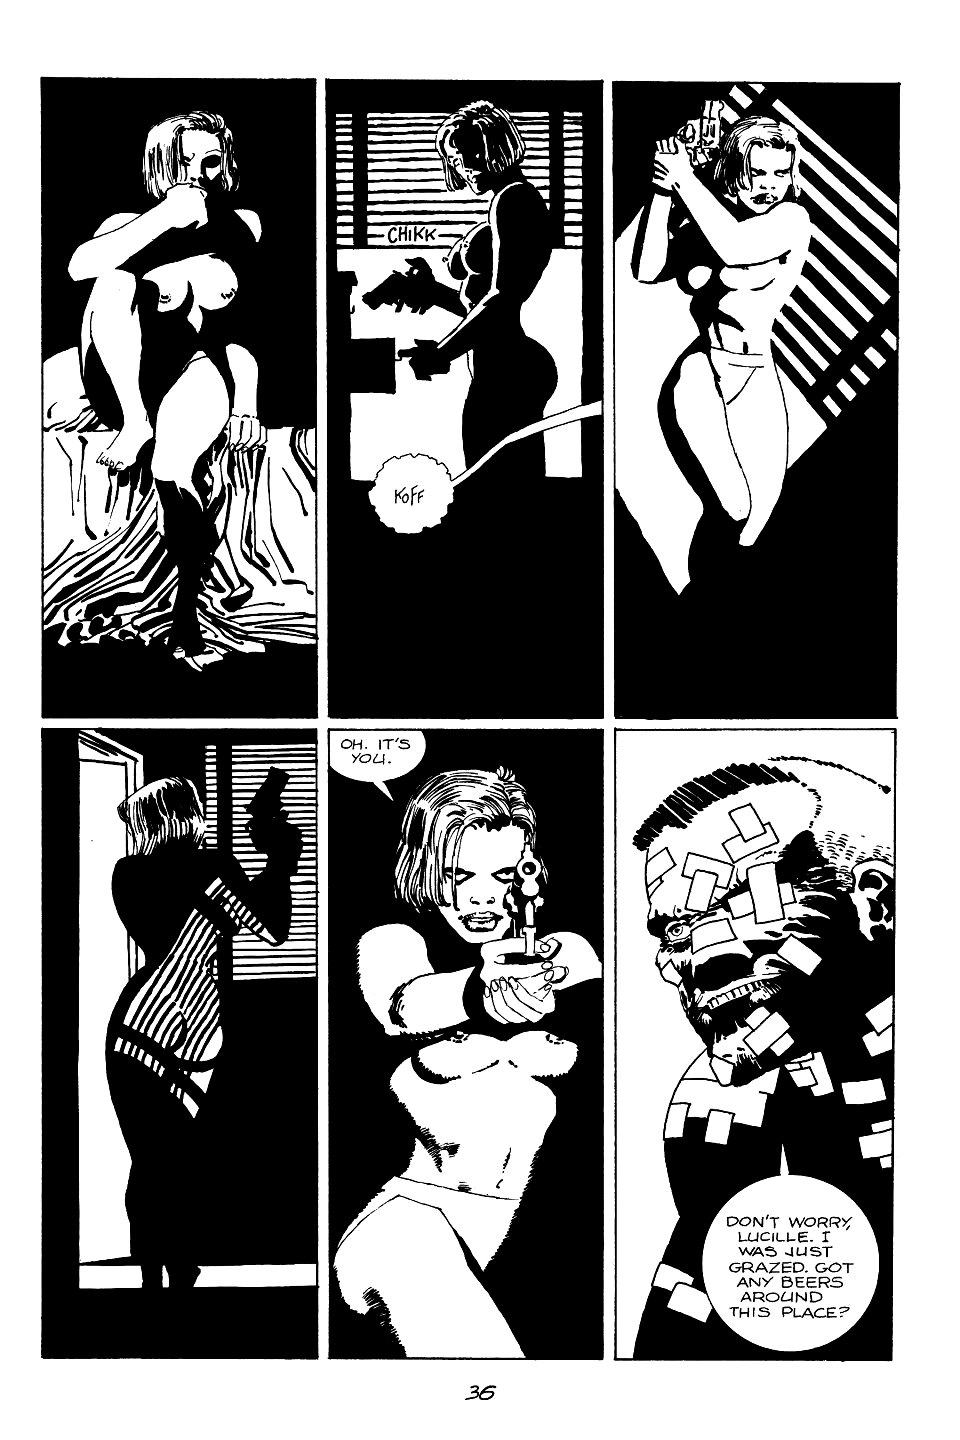 page 36 of sin city 1 the hard goodbye